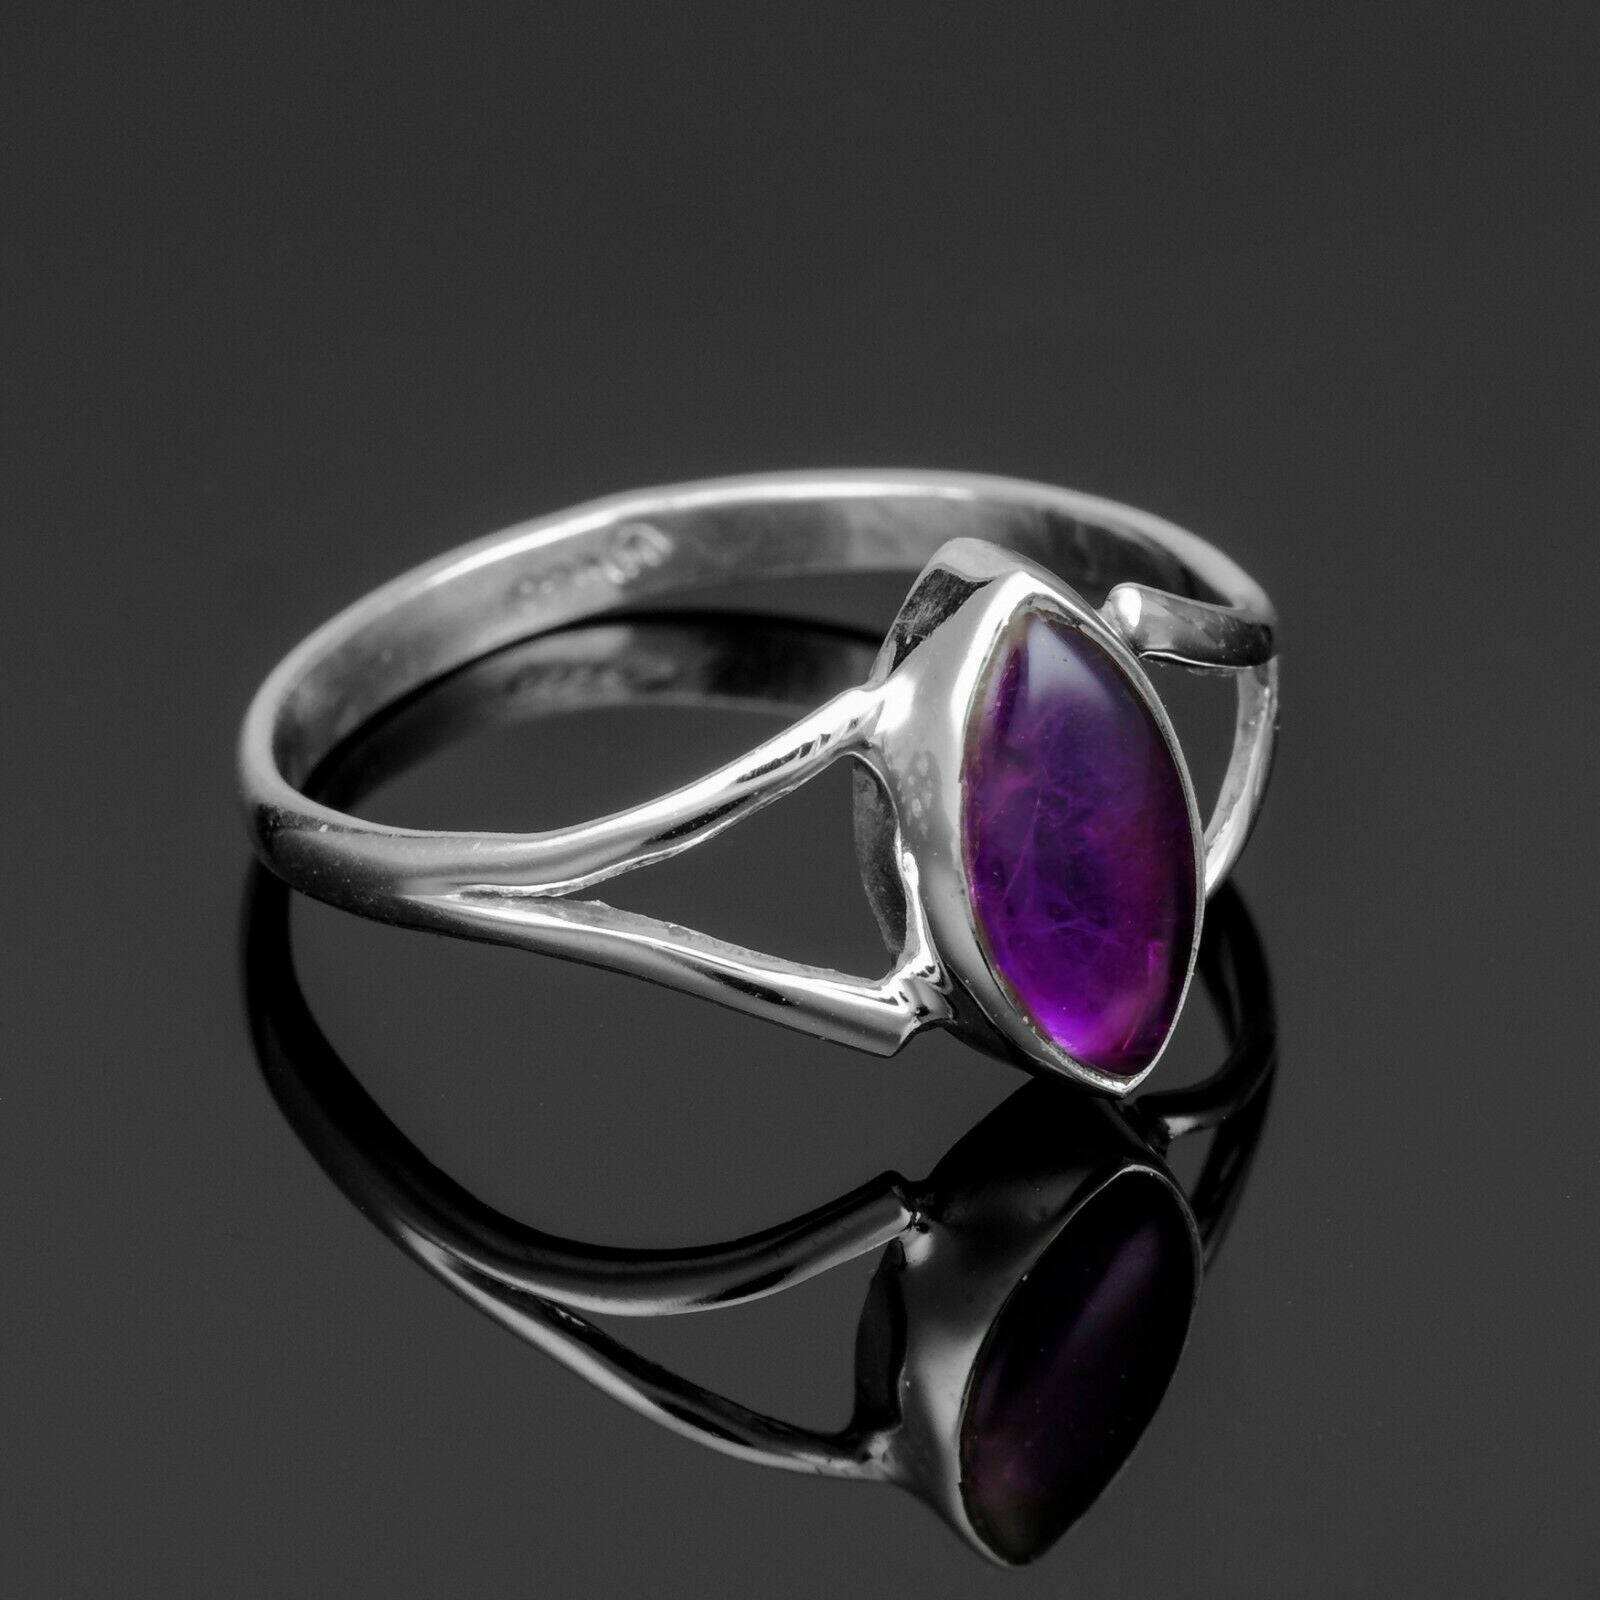 Marquise Amethyst 925 Sterling Silver Ladies Gemstone Jewellery Ring Gift Boxed